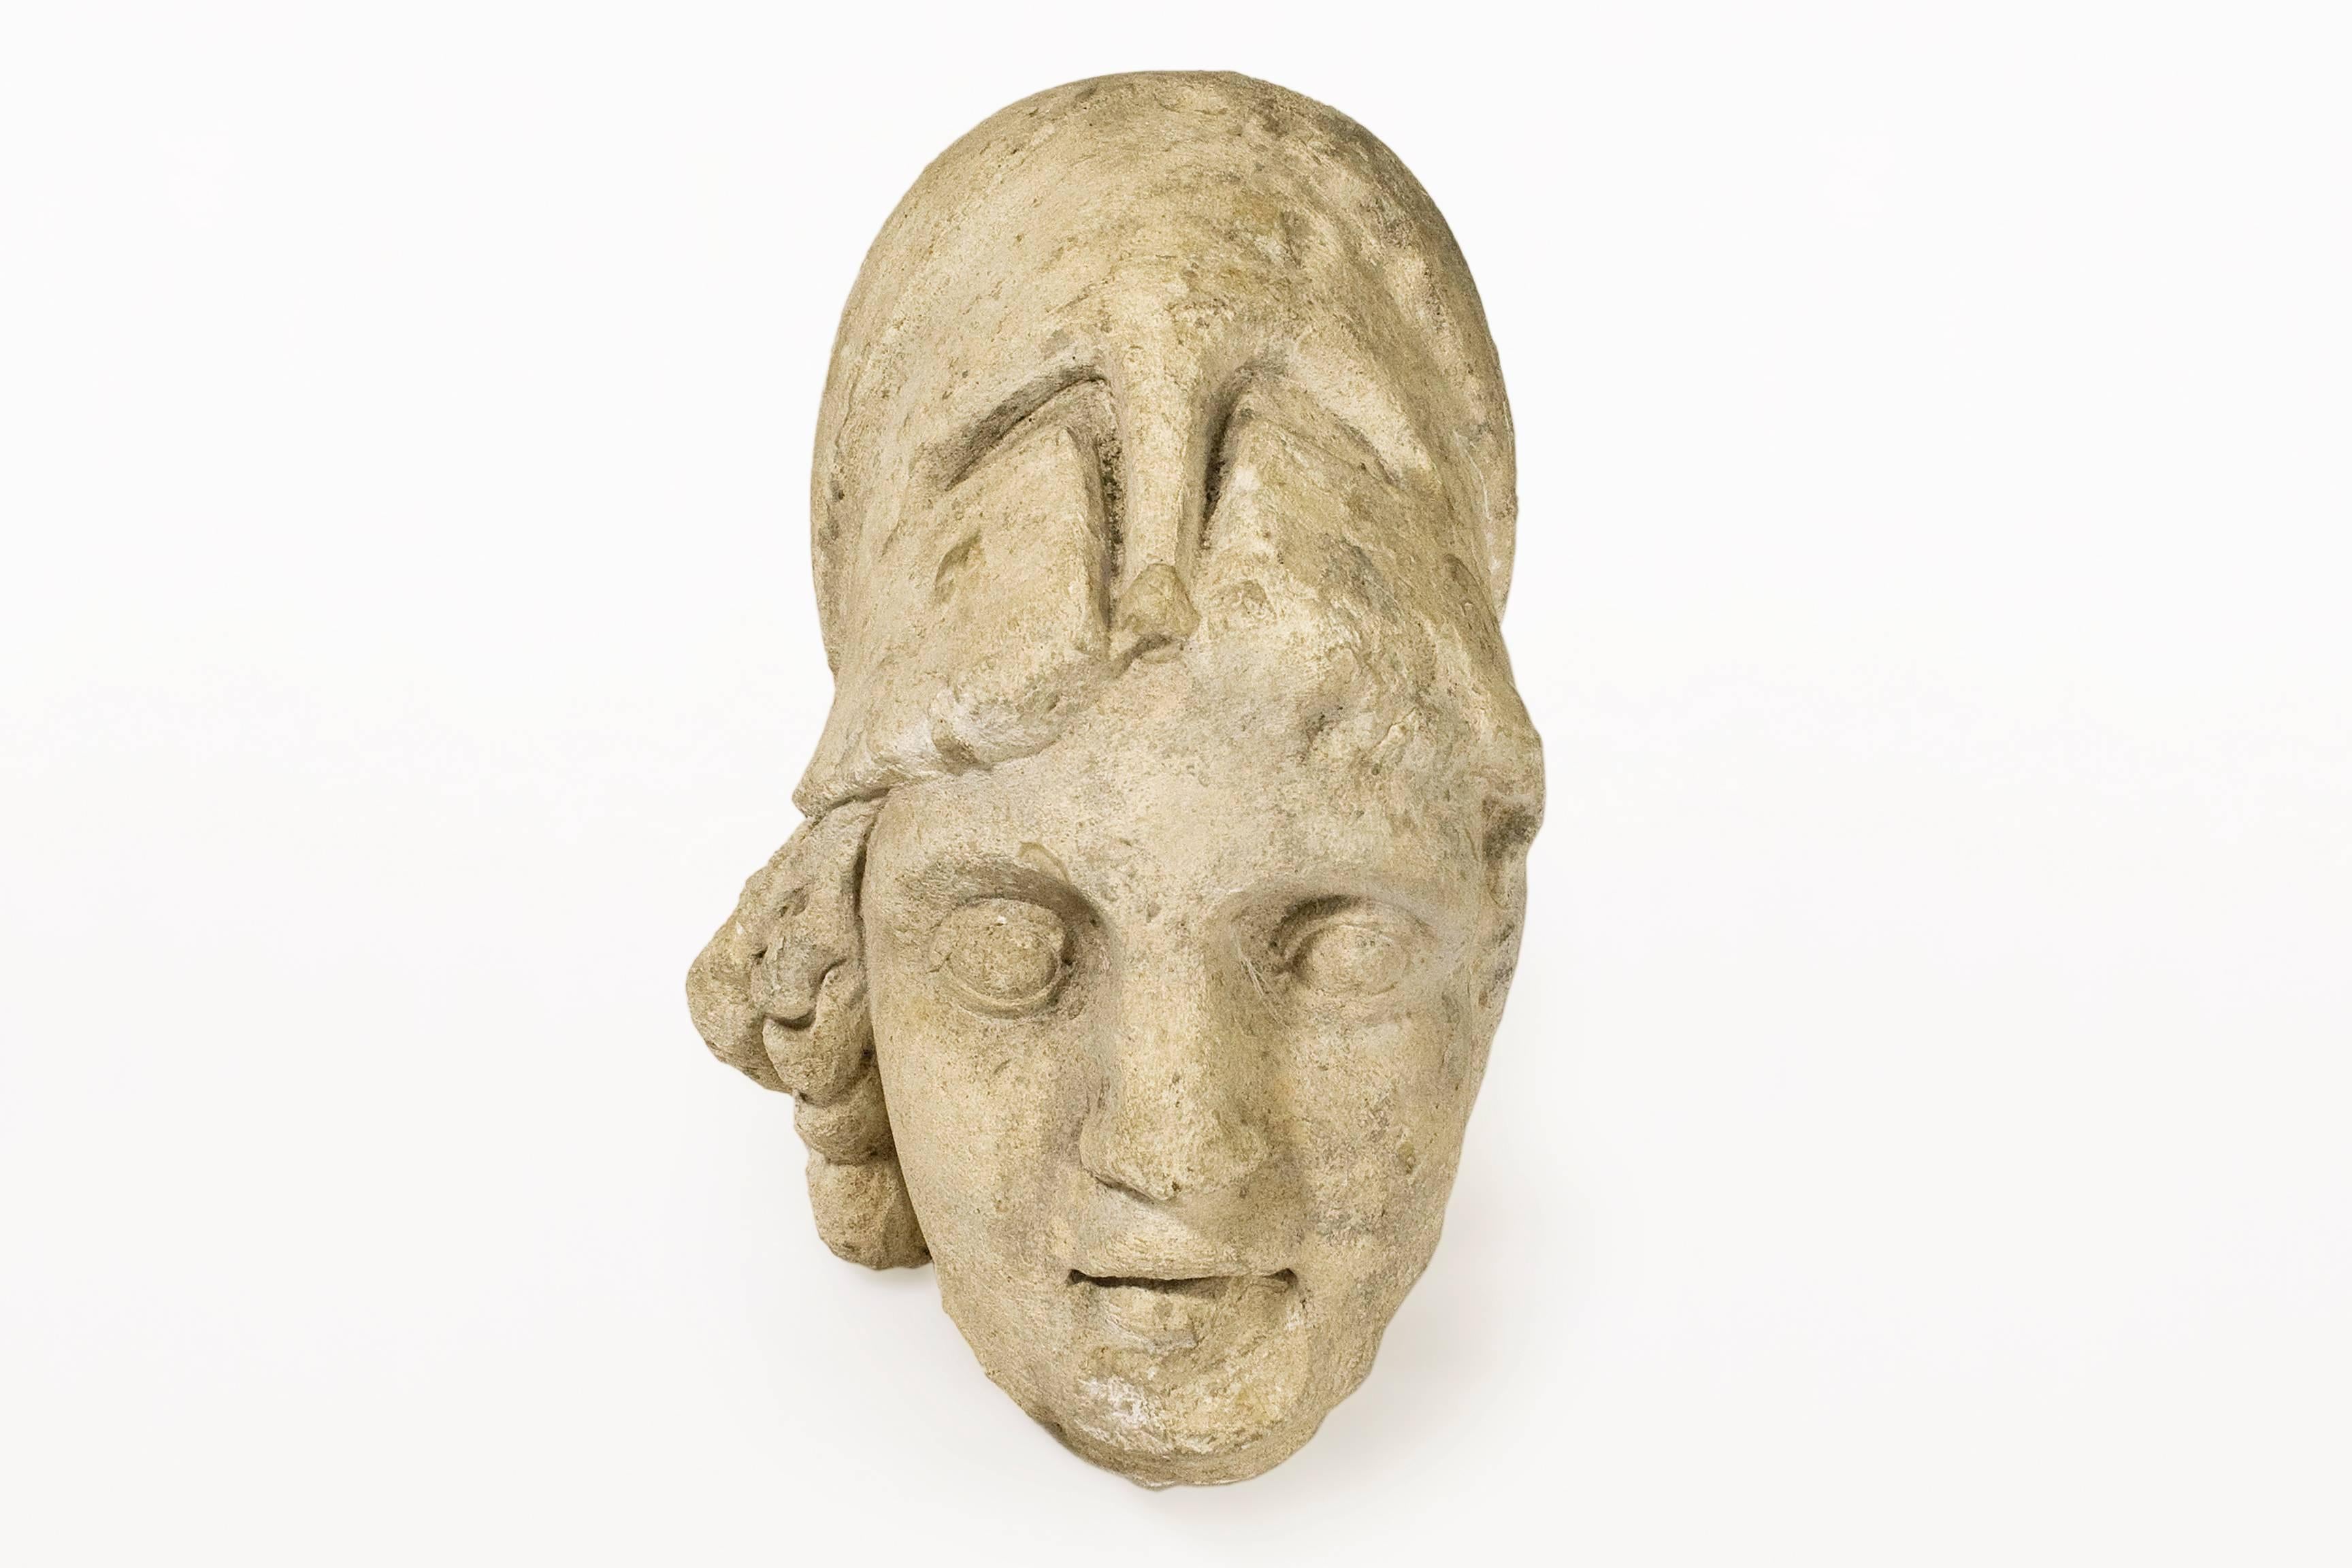 Roman antiquities stone bust sculpture of Minerva with Helment
carved French sandstone,
2nd century, AD.
Southern France, Sandstone from the Gard Region.
 Provenance: Private Collector, South of France.
Very good vintage condition.